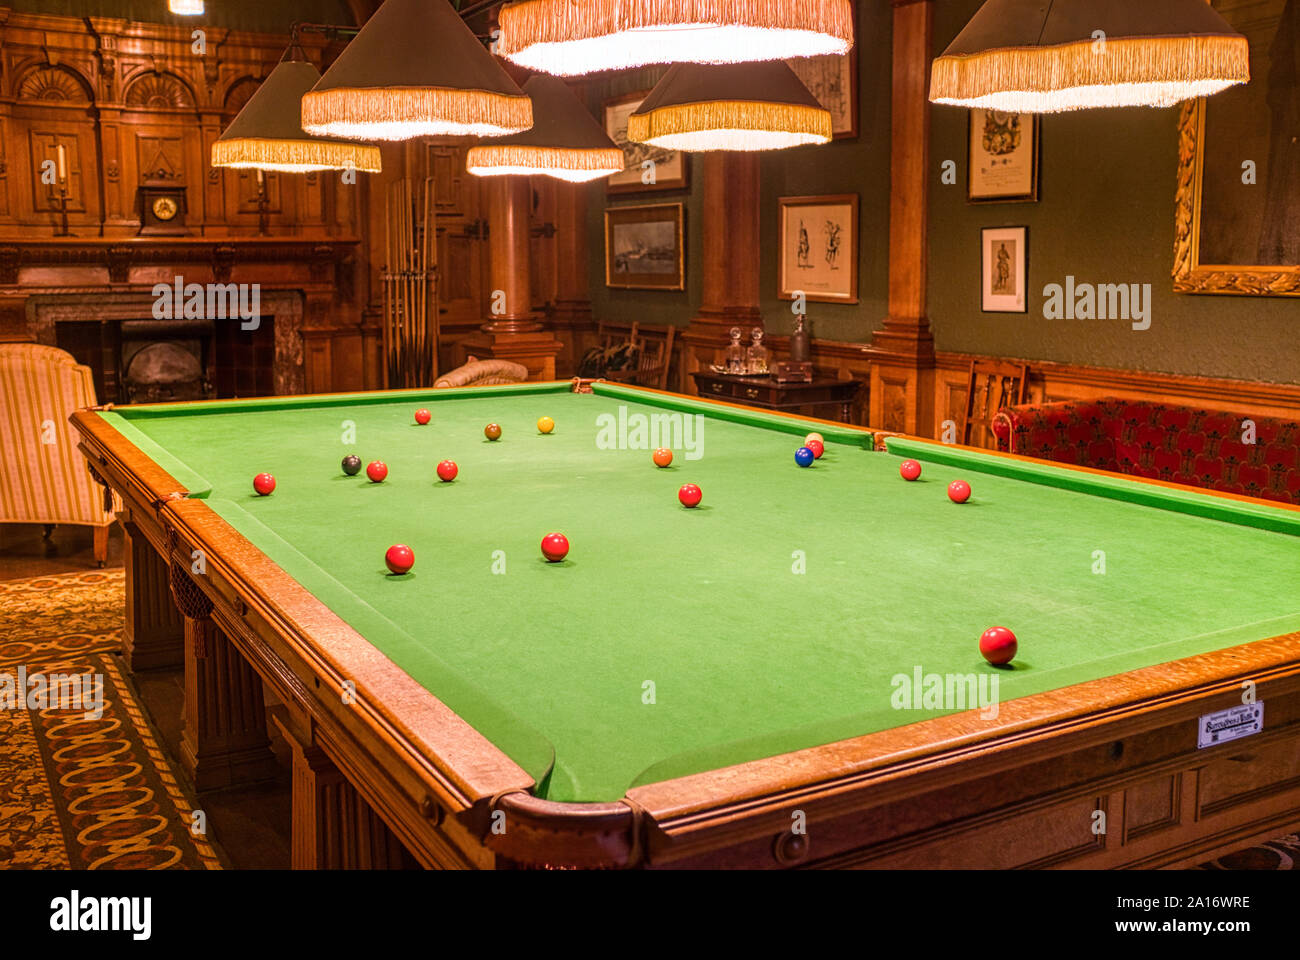 snooker-table-in-the-snooker-room-at-cragside-house-northumberland-uk-2A16WRE.jpg